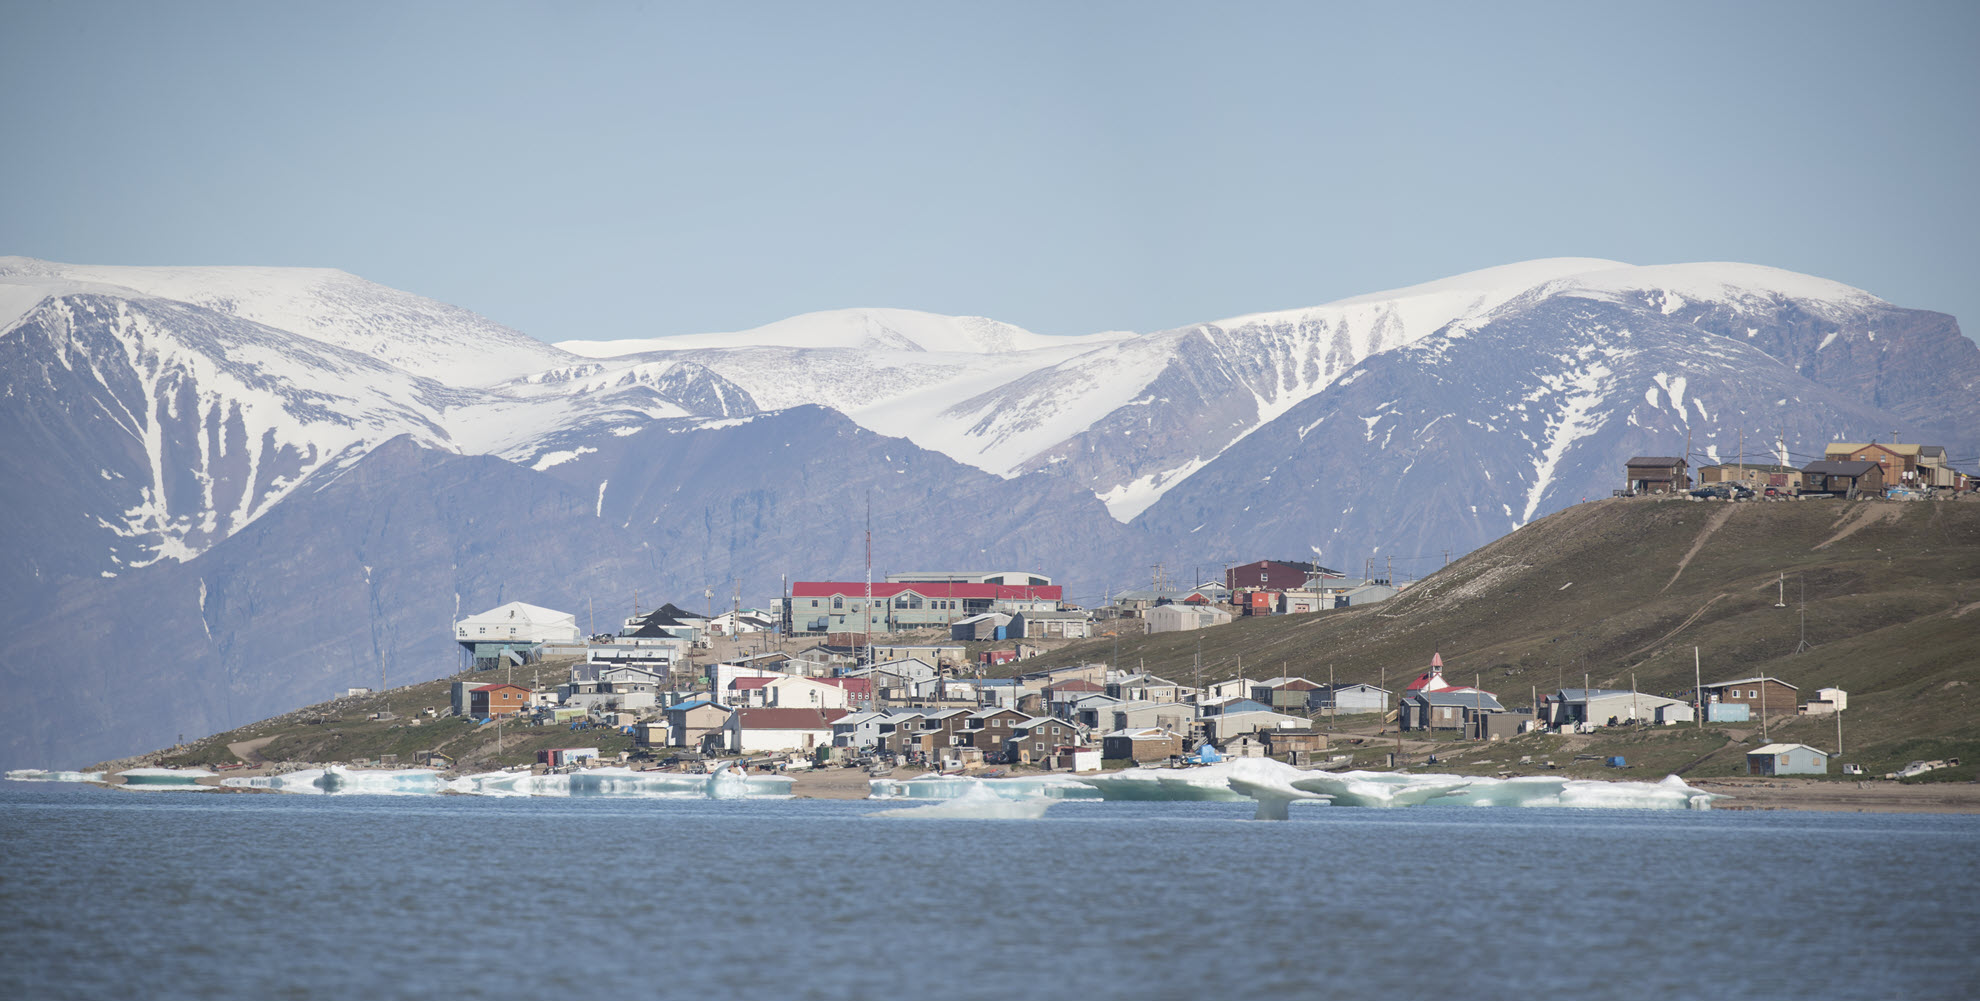 The community of Pond Inlet on Baffin Island